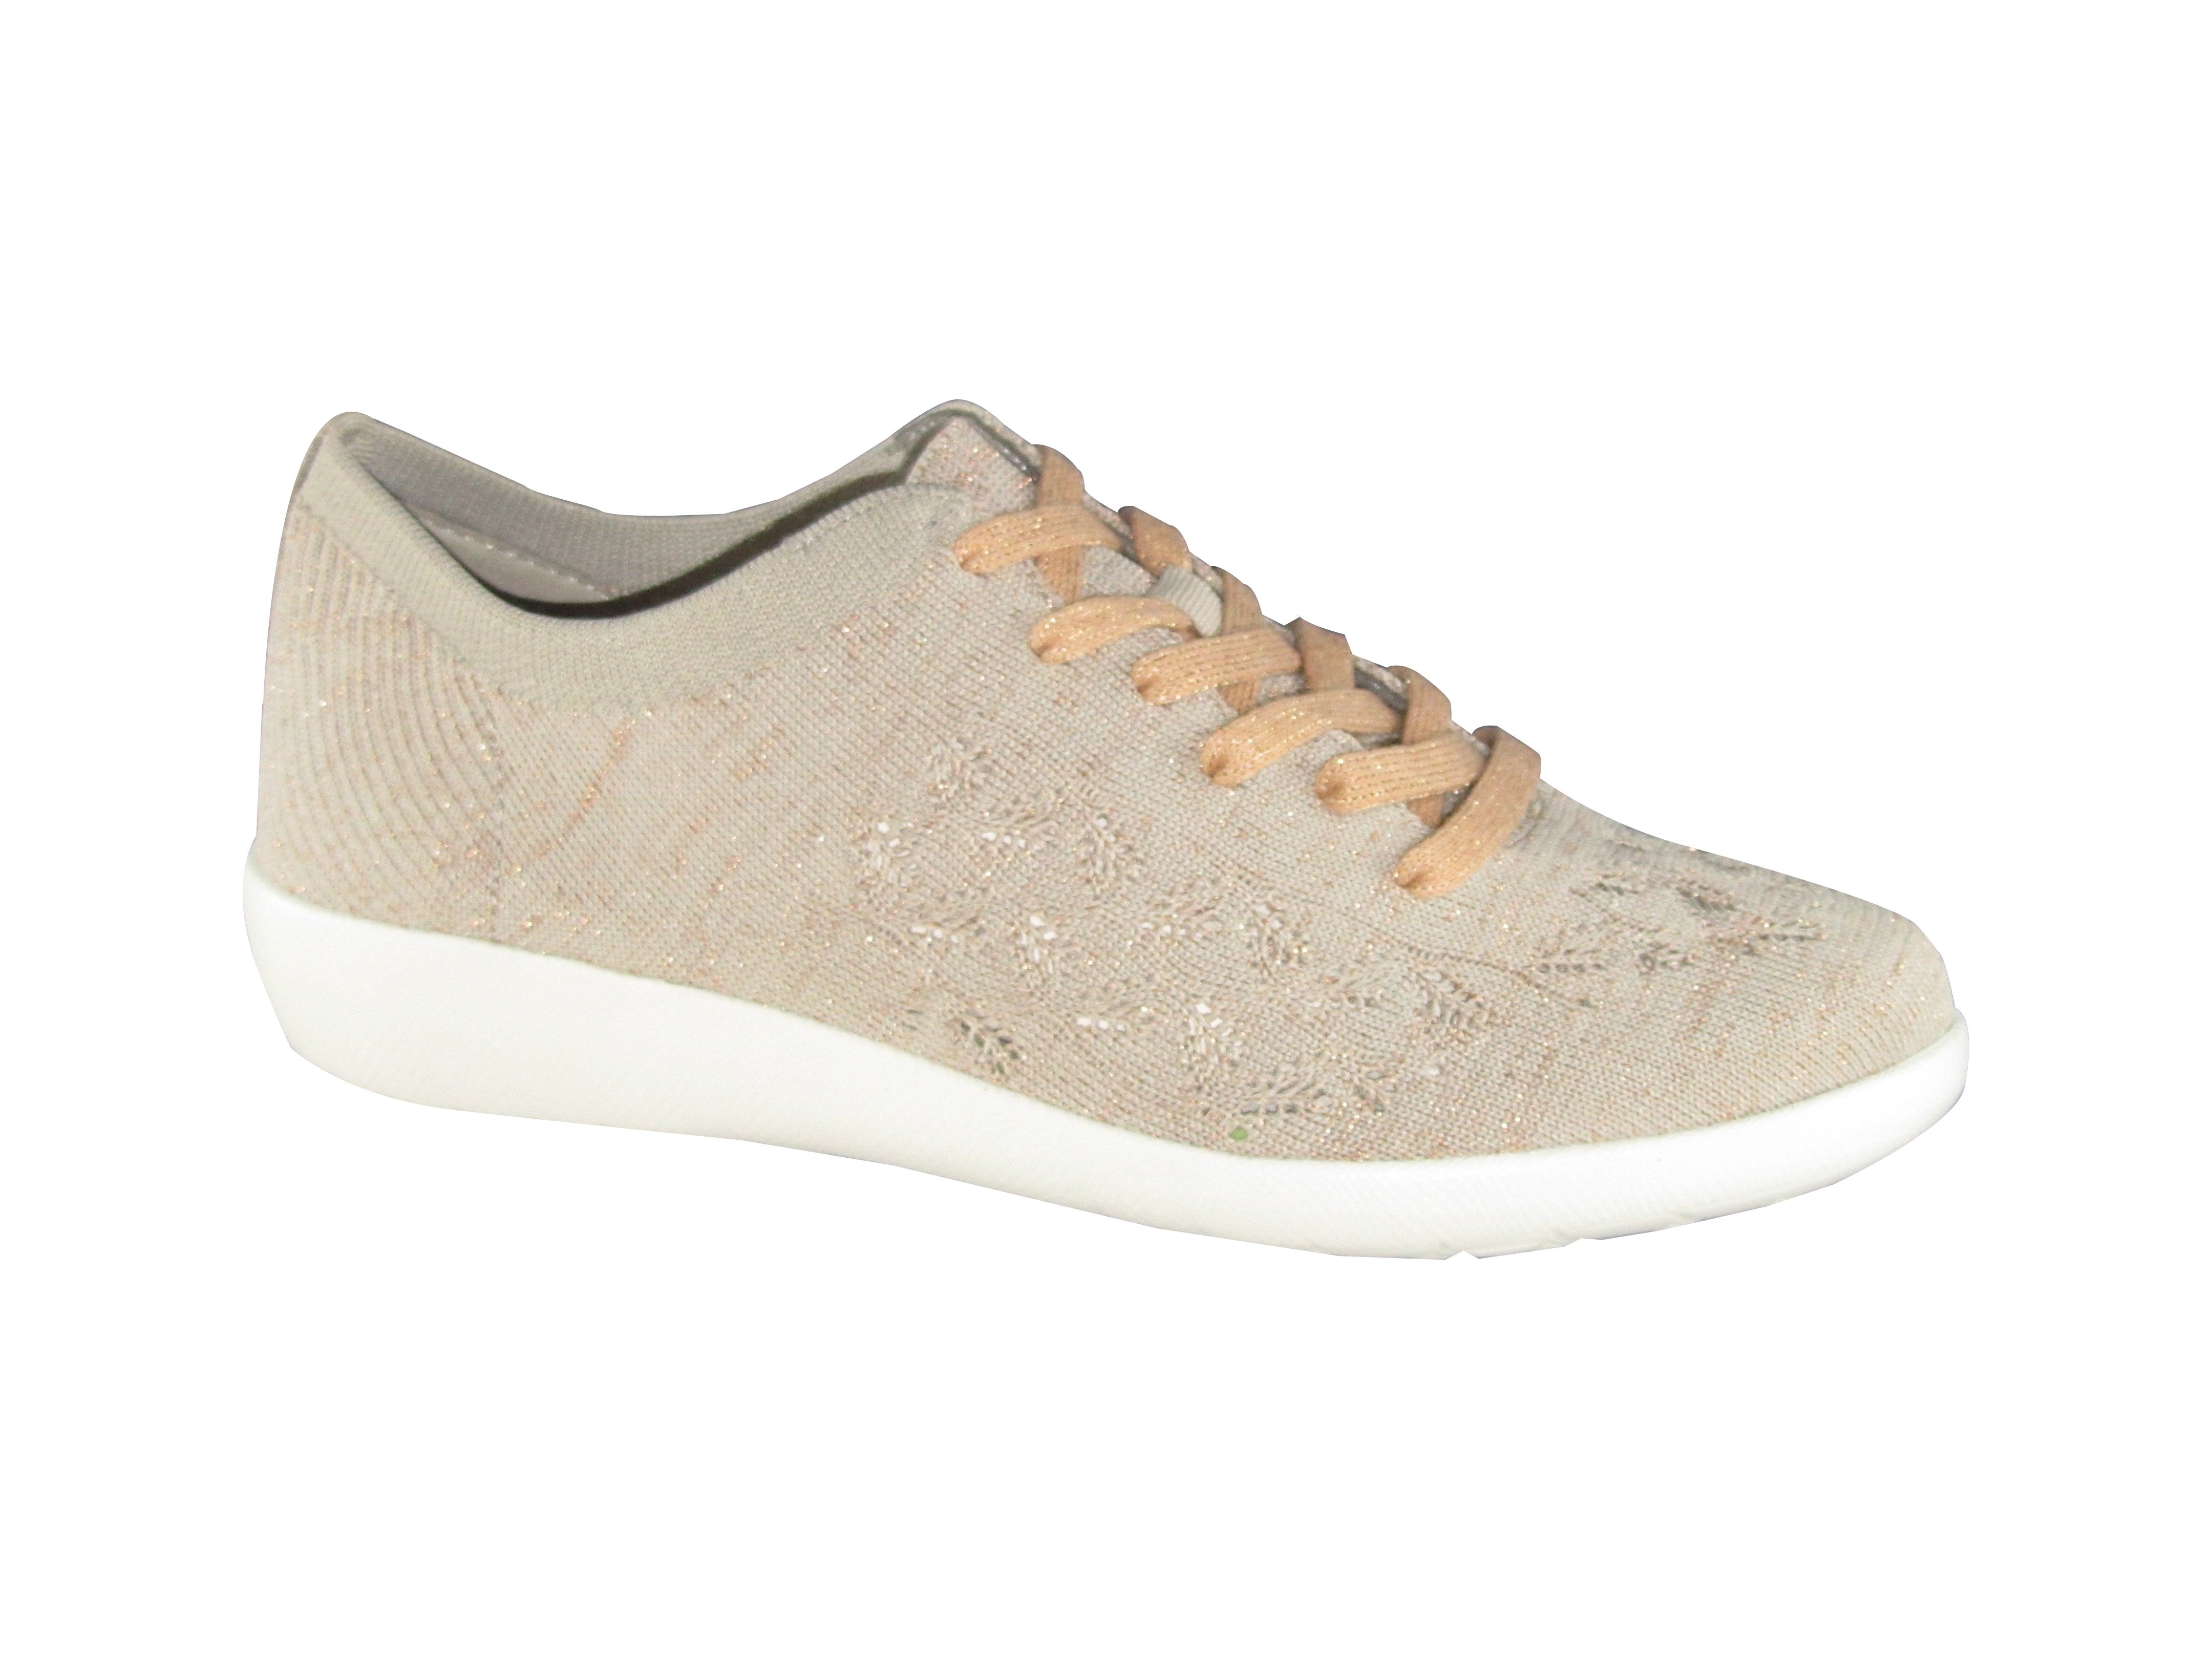 ULTIMA ZIERA - WOMENS SHOES-SHOES - low to flat : Shirley's Shoes ...